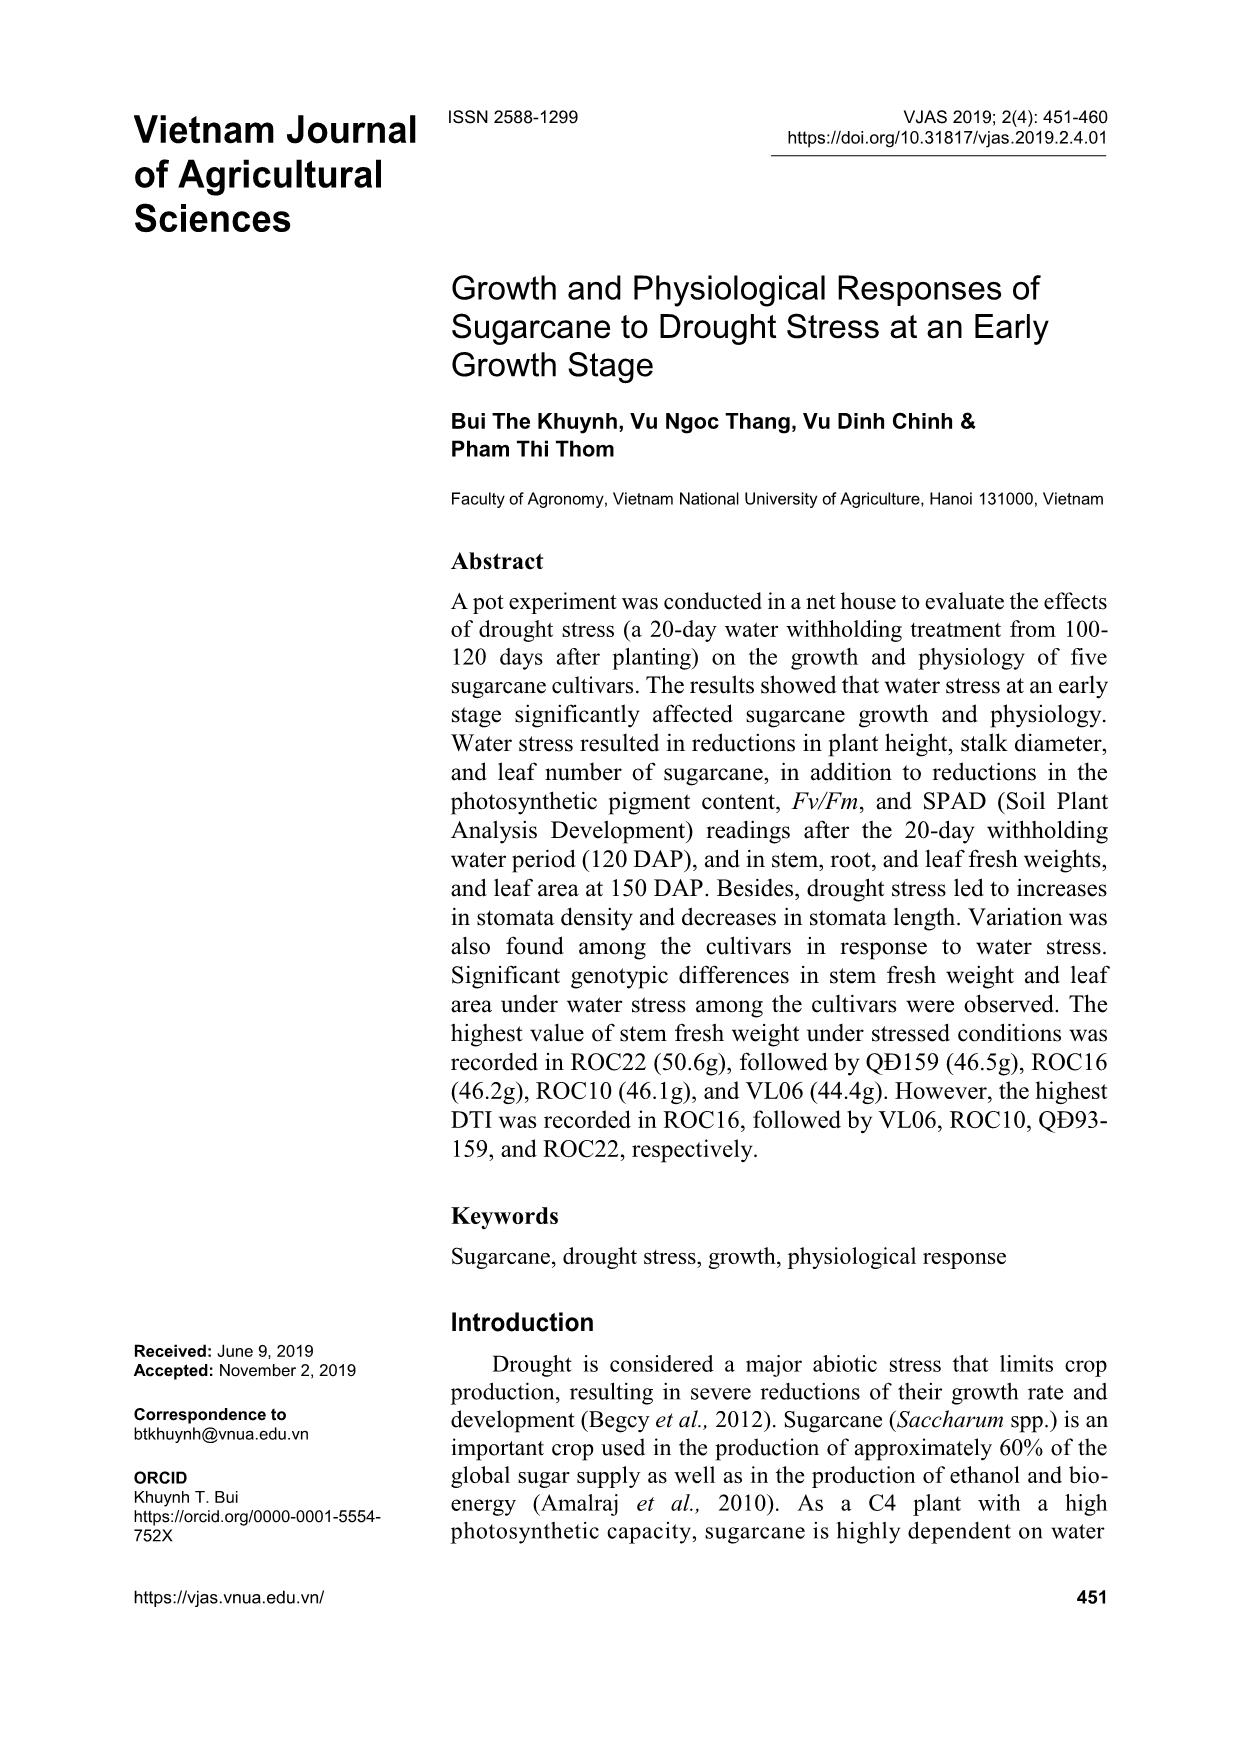 Growth and physiological responses of sugarcane to drought stress at an early growth stage trang 1